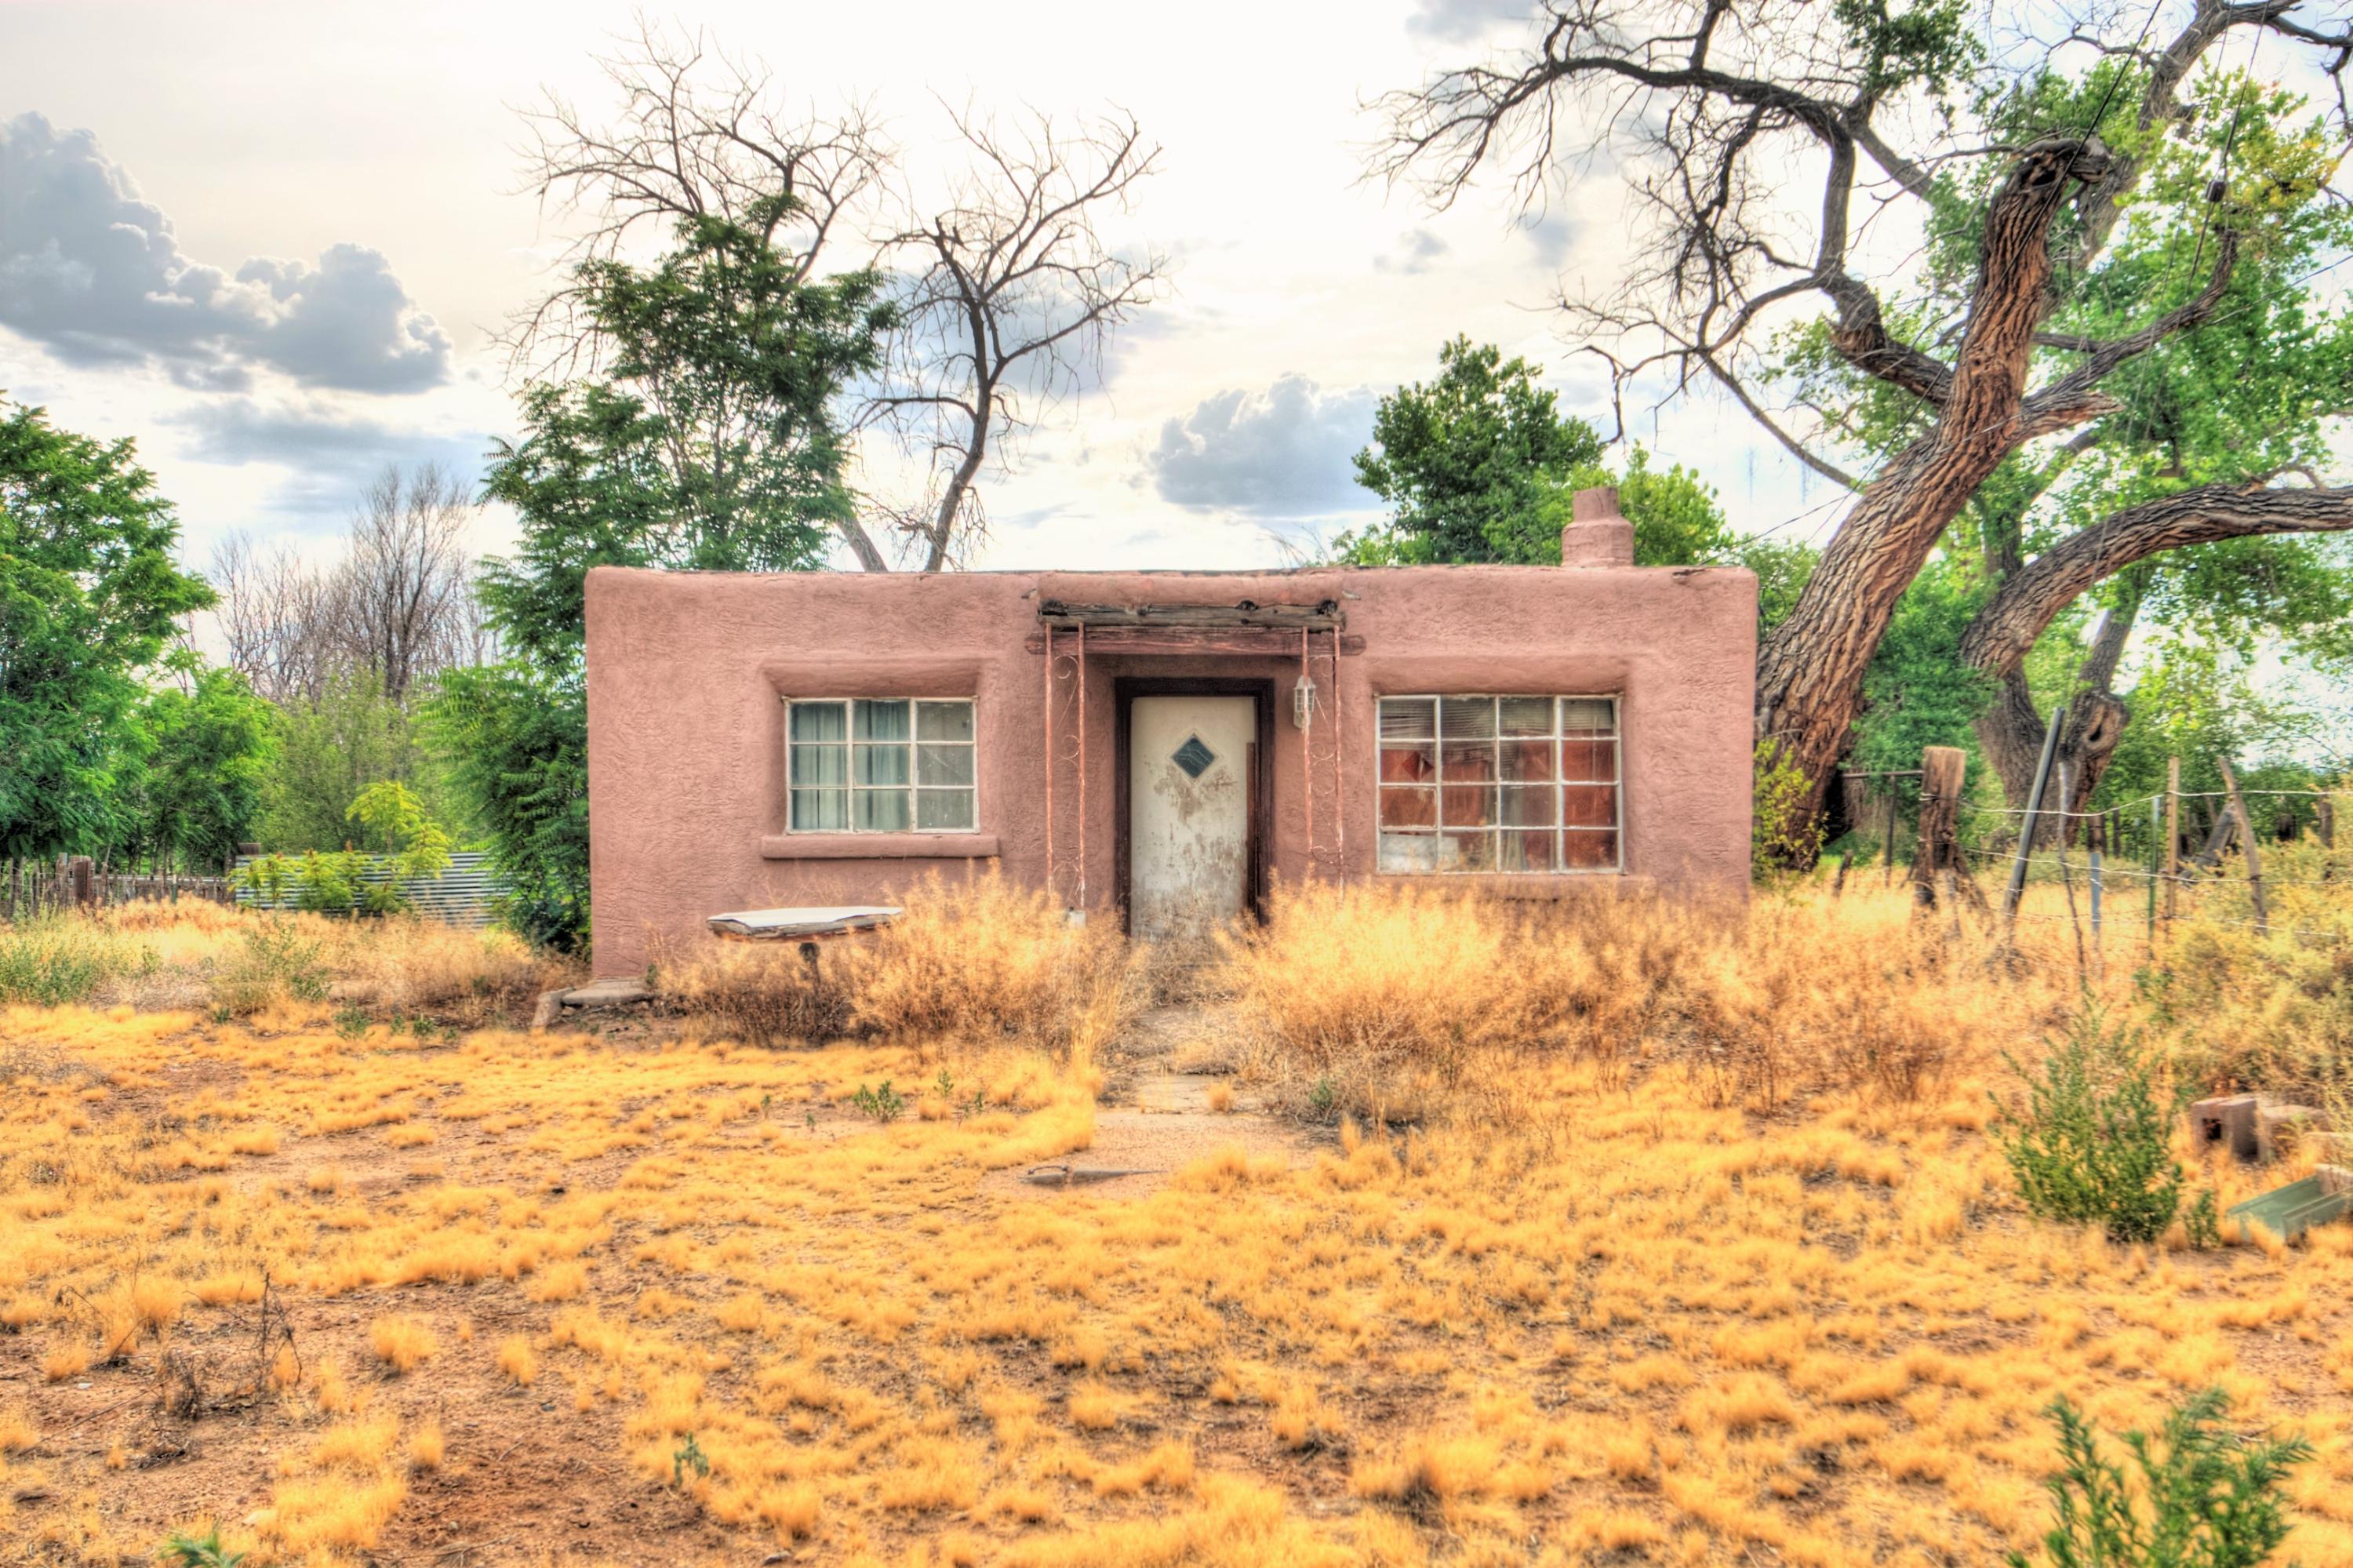 This North Valley Adobe Home is tucked away in a Great Location. Huge potential with a Awesome 0.37 Acre Lot! Sold As-Is, Cash Only with Proof of Funds!!!